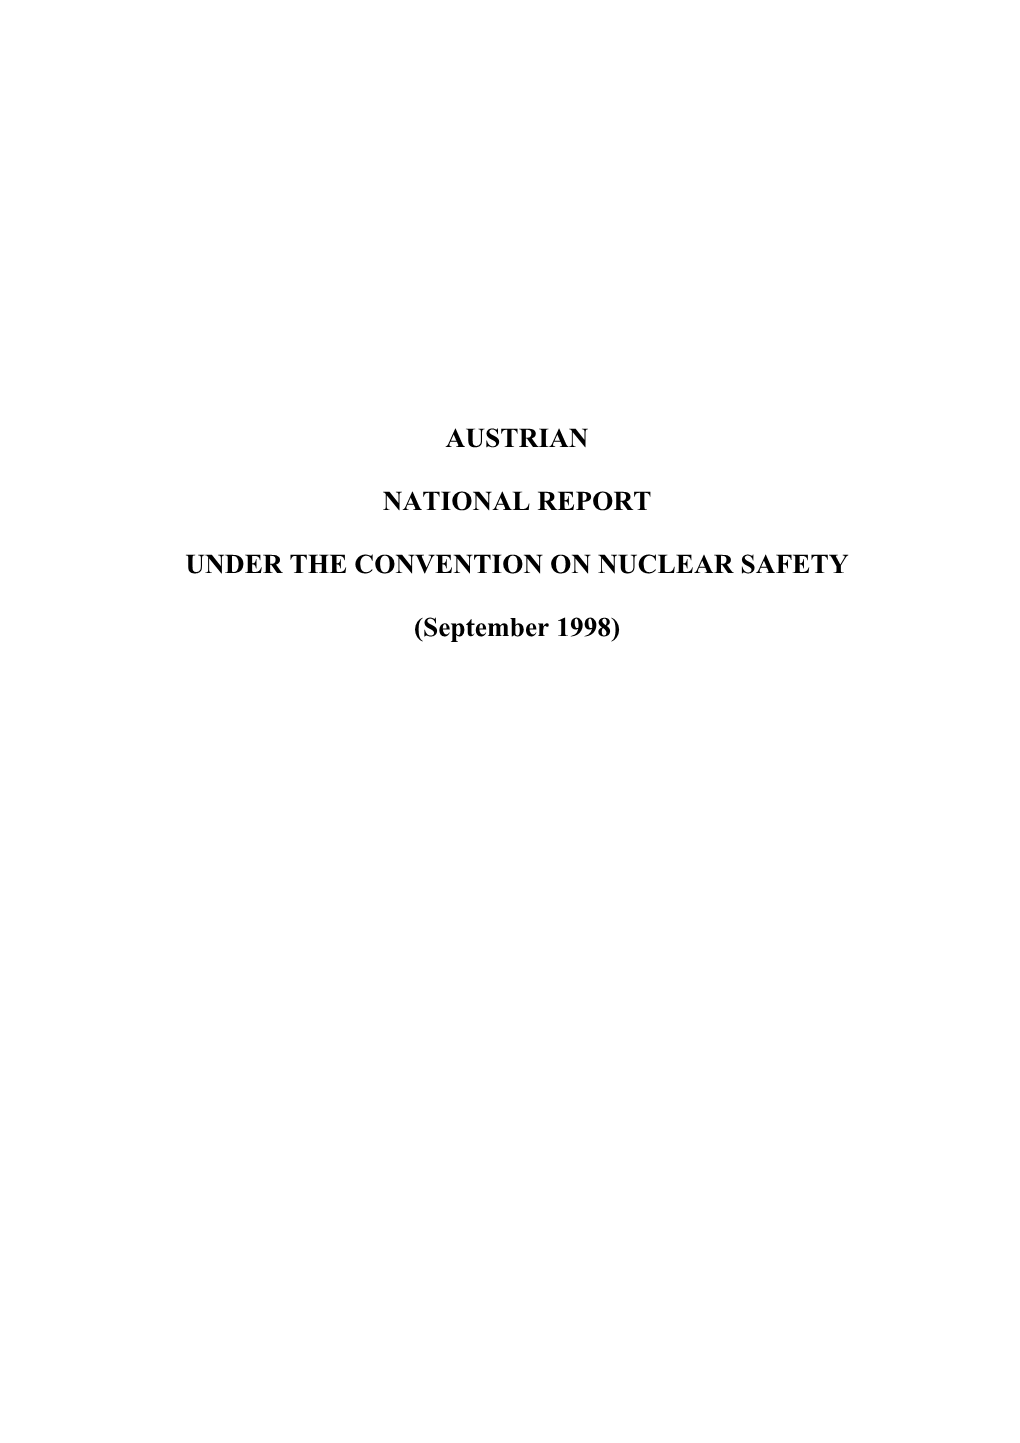 Under the Convention on Nuclear Safety